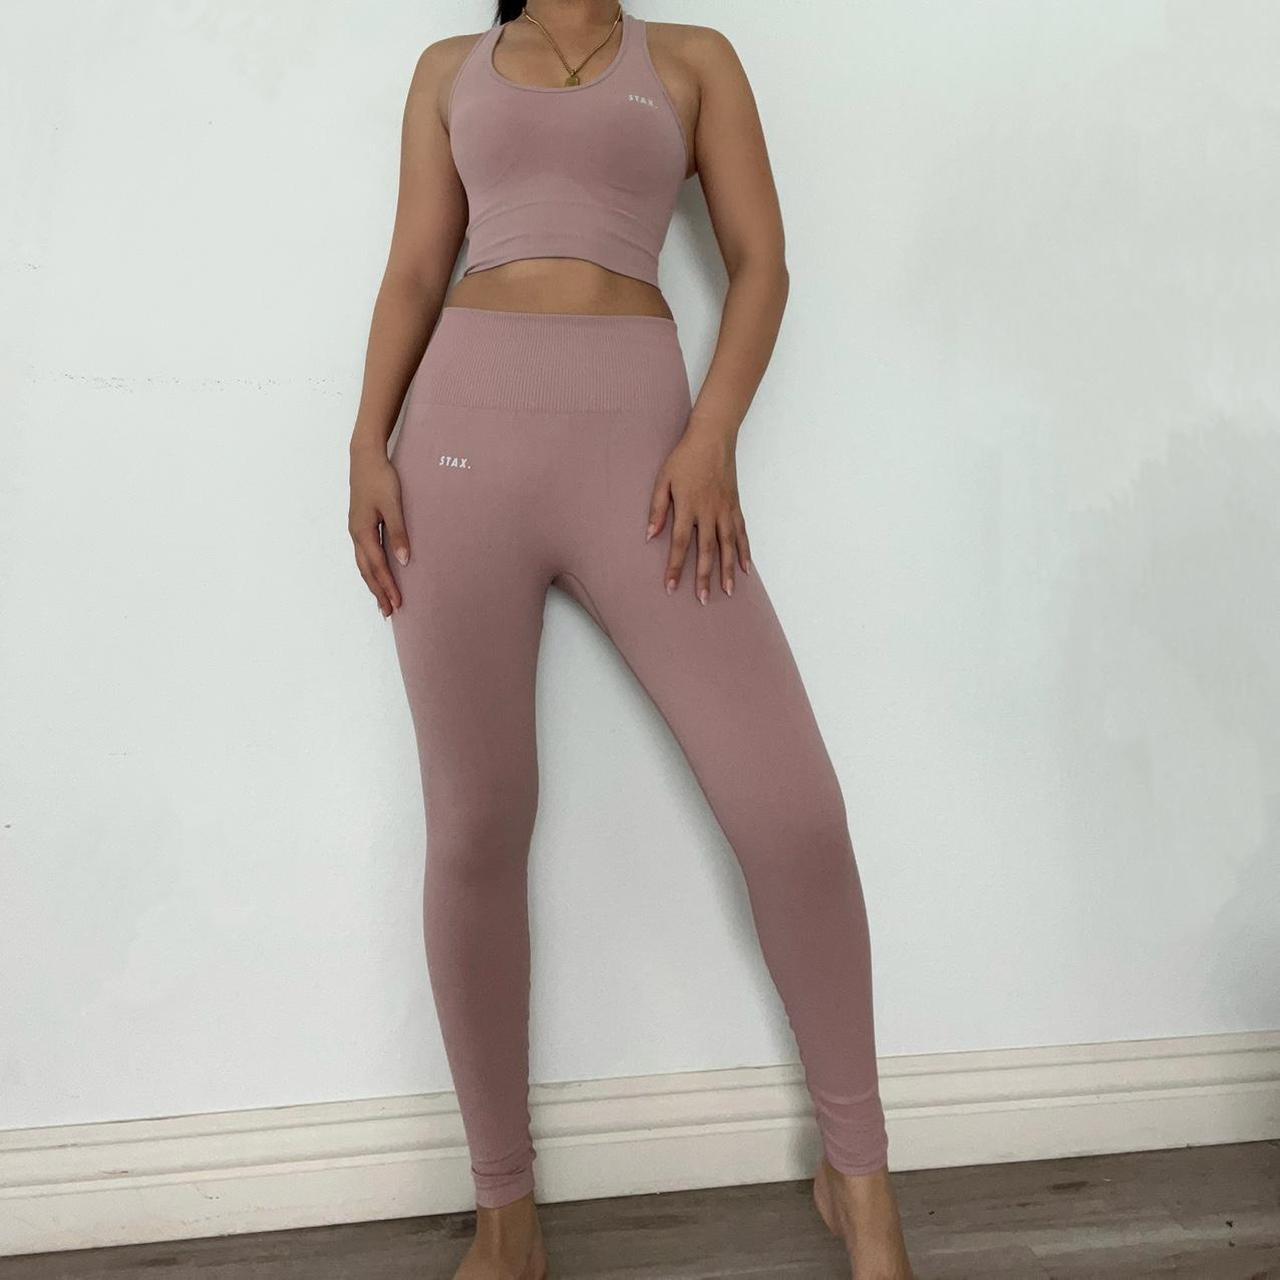 Stax legging set in mauve. So comfy and so stretchy! - Depop